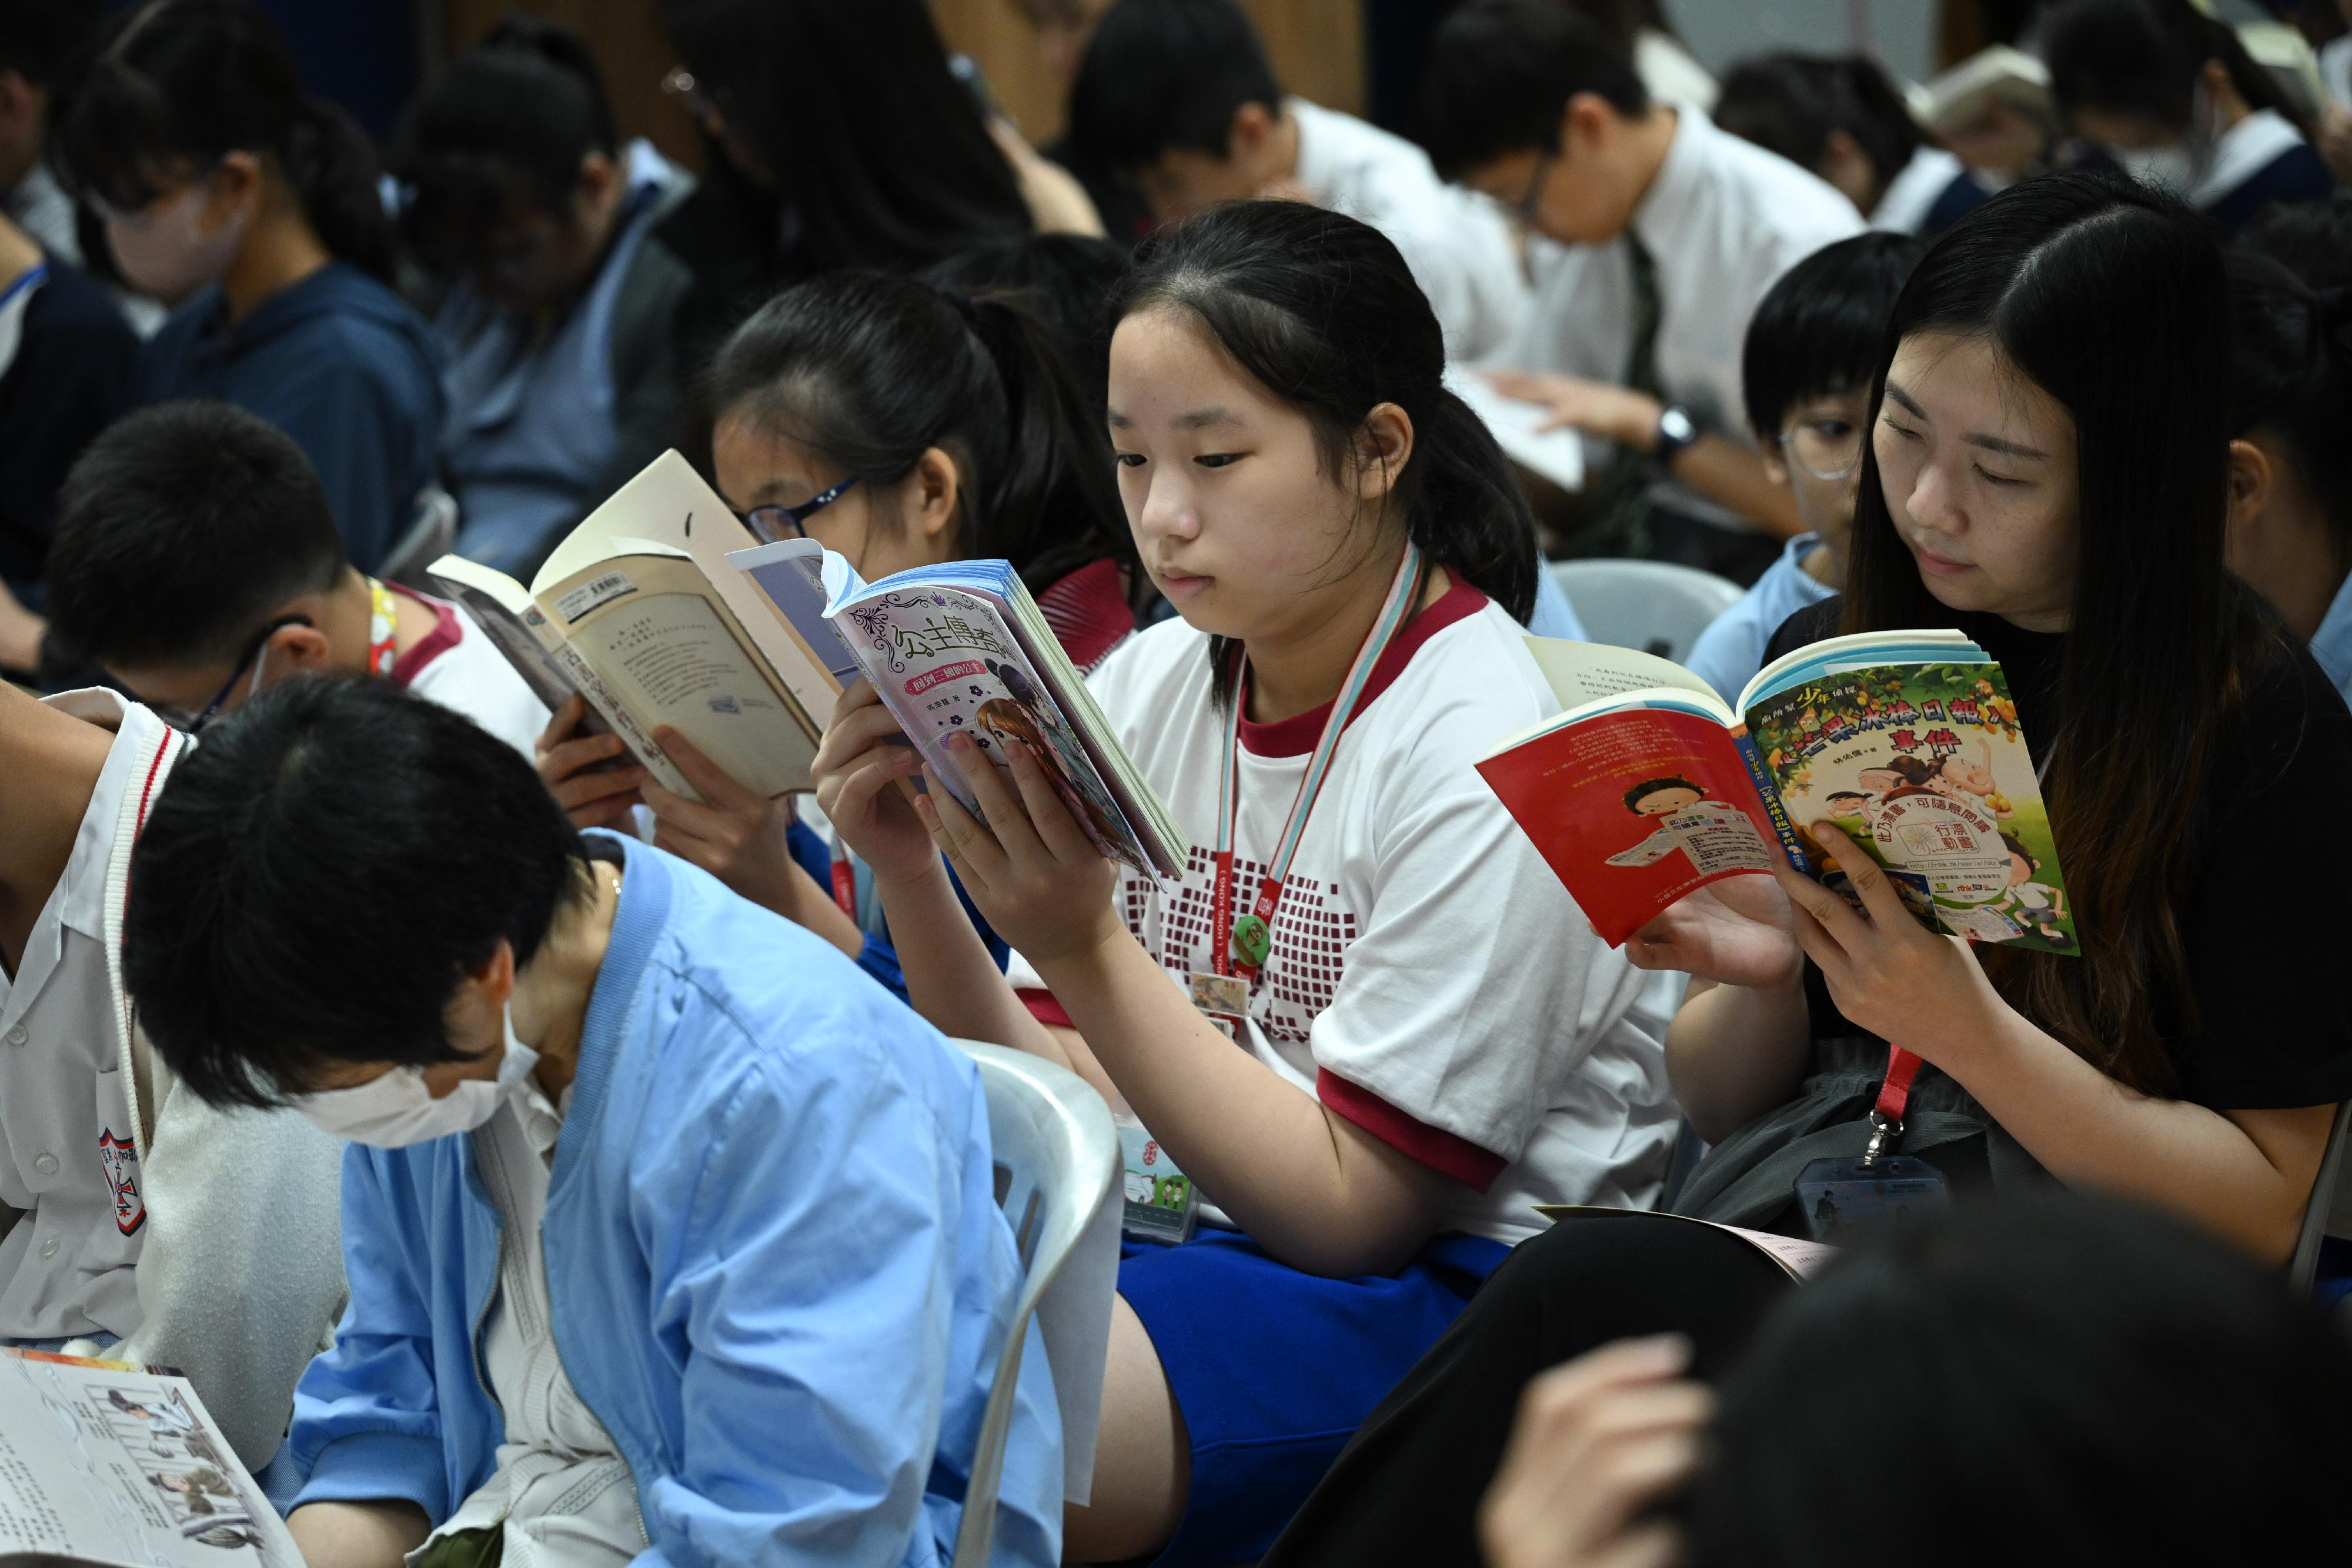 The Education Bureau held joint secondary and primary school 30-minute reading activities on the first Hong Kong Reading for All Day today (April 23) with more than 220 schools participating. Photo shows students reading at the activity held at  the HKSKH Bishop Hall Secondary School in Sau Mau Ping.